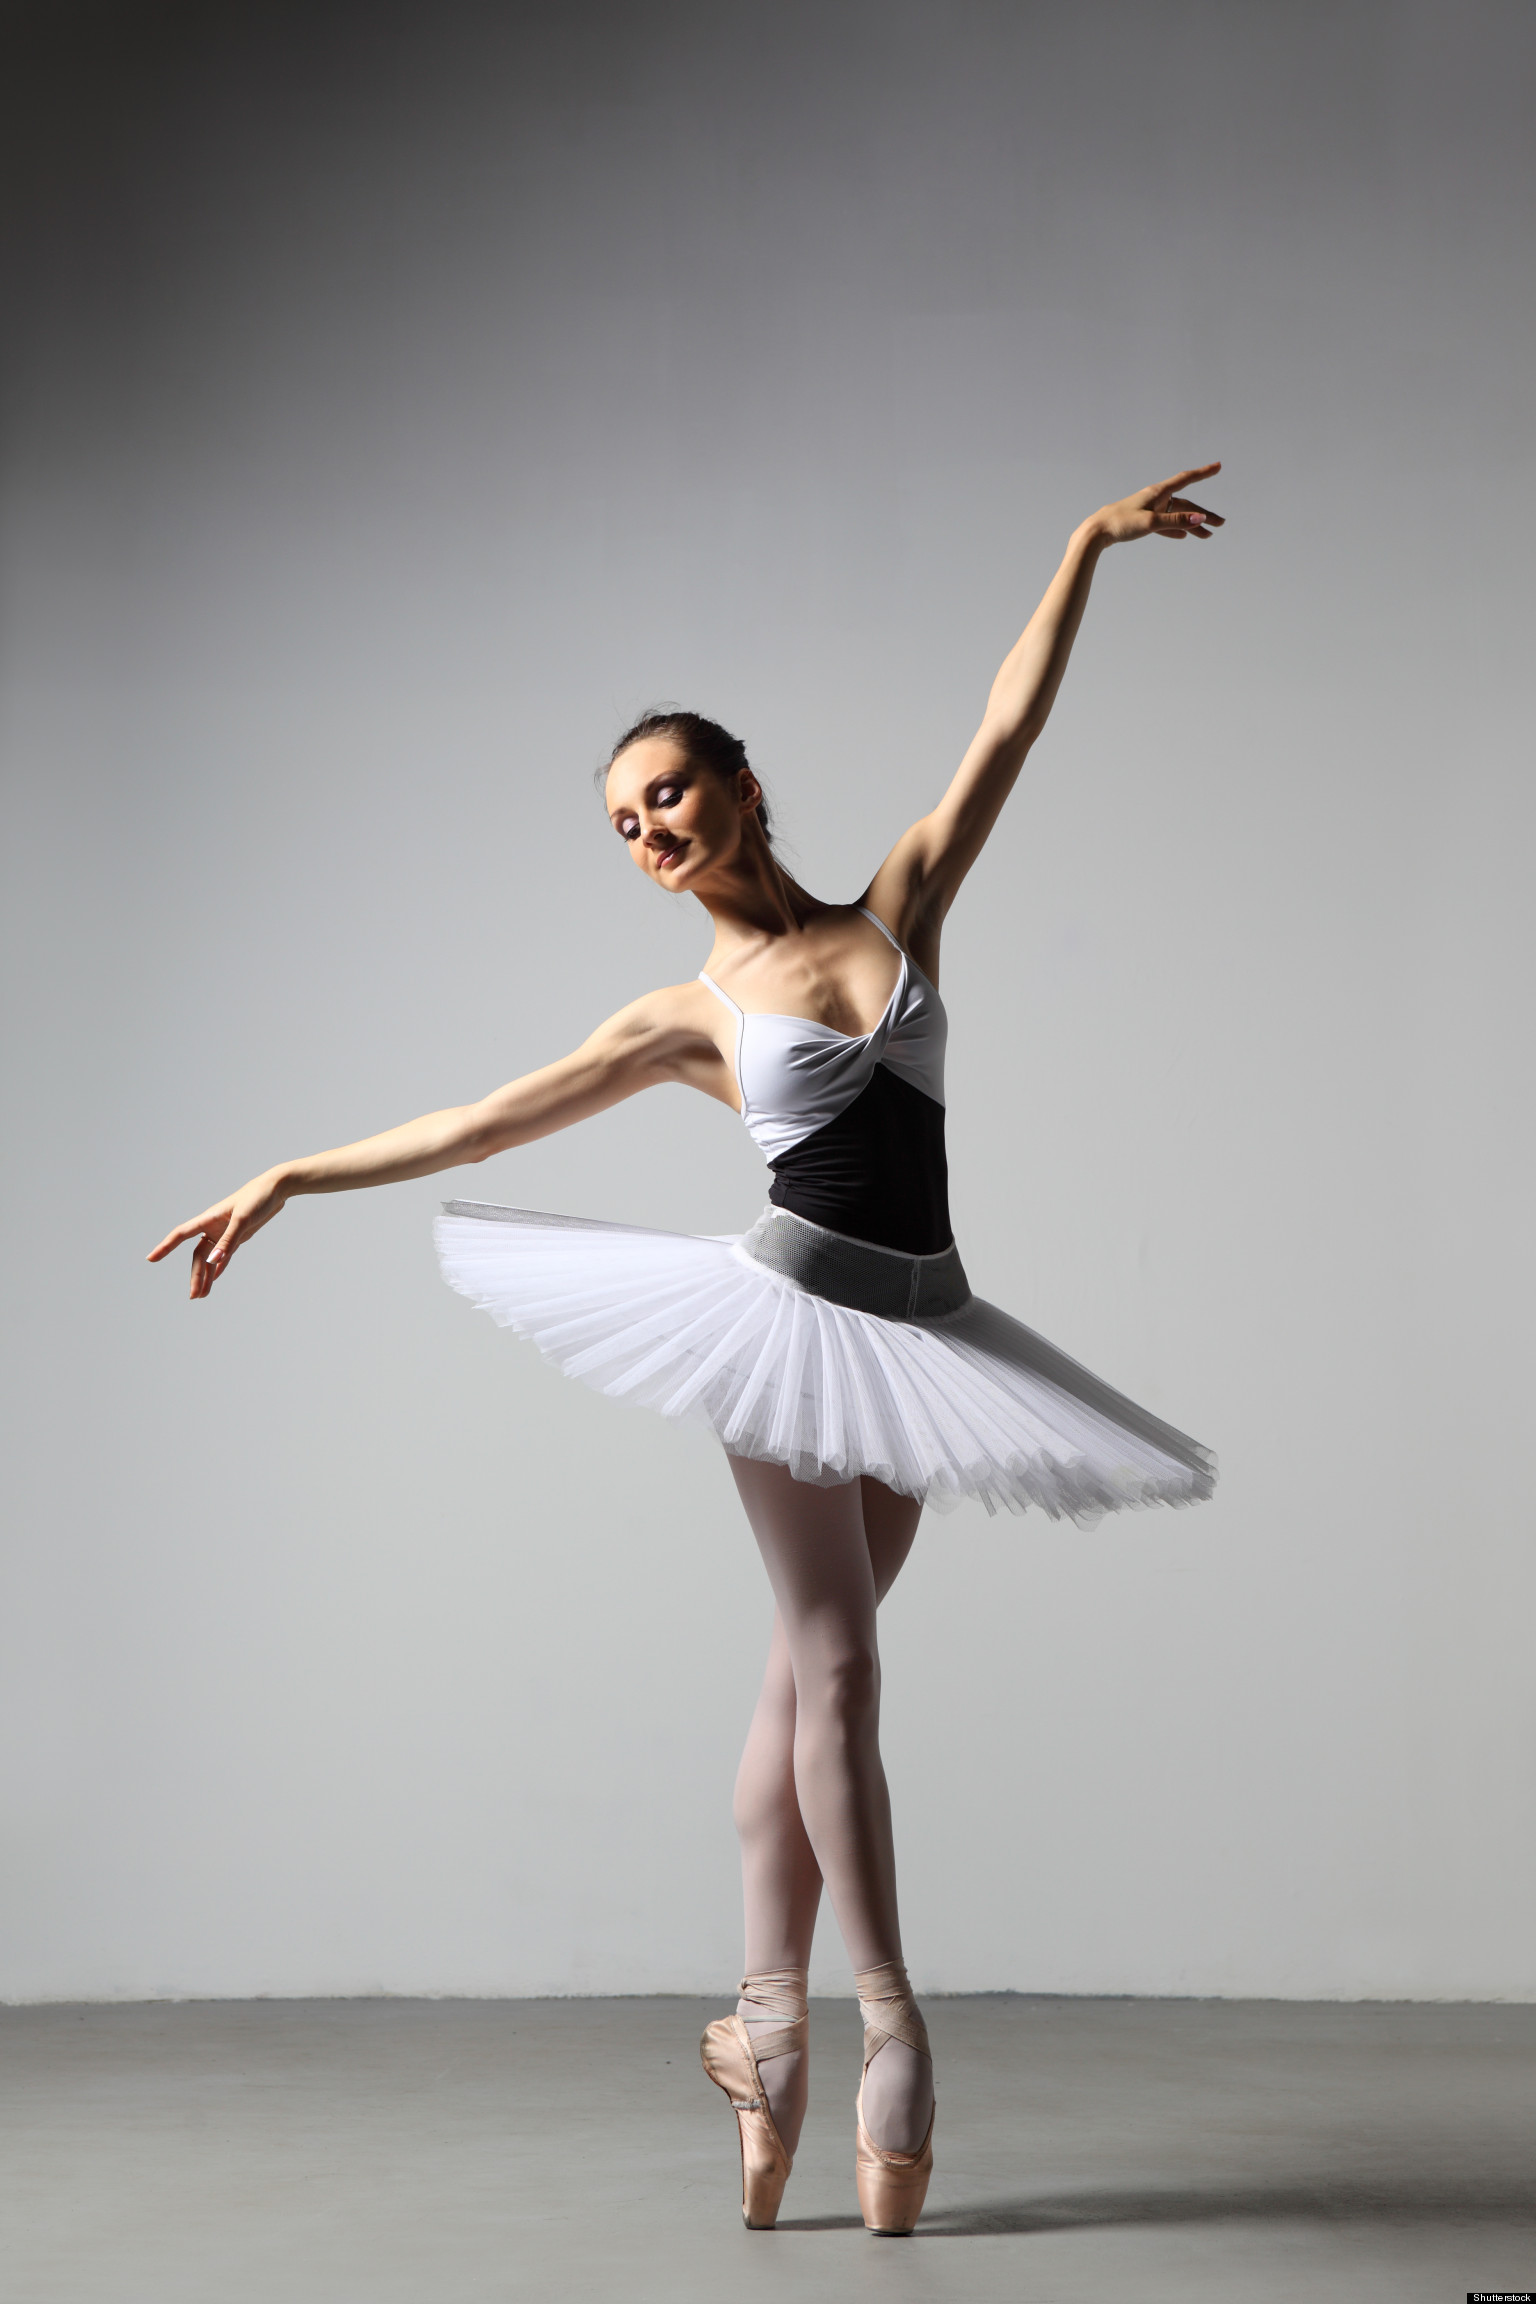 How Fattening Up Will Save Ballet | HuffPost